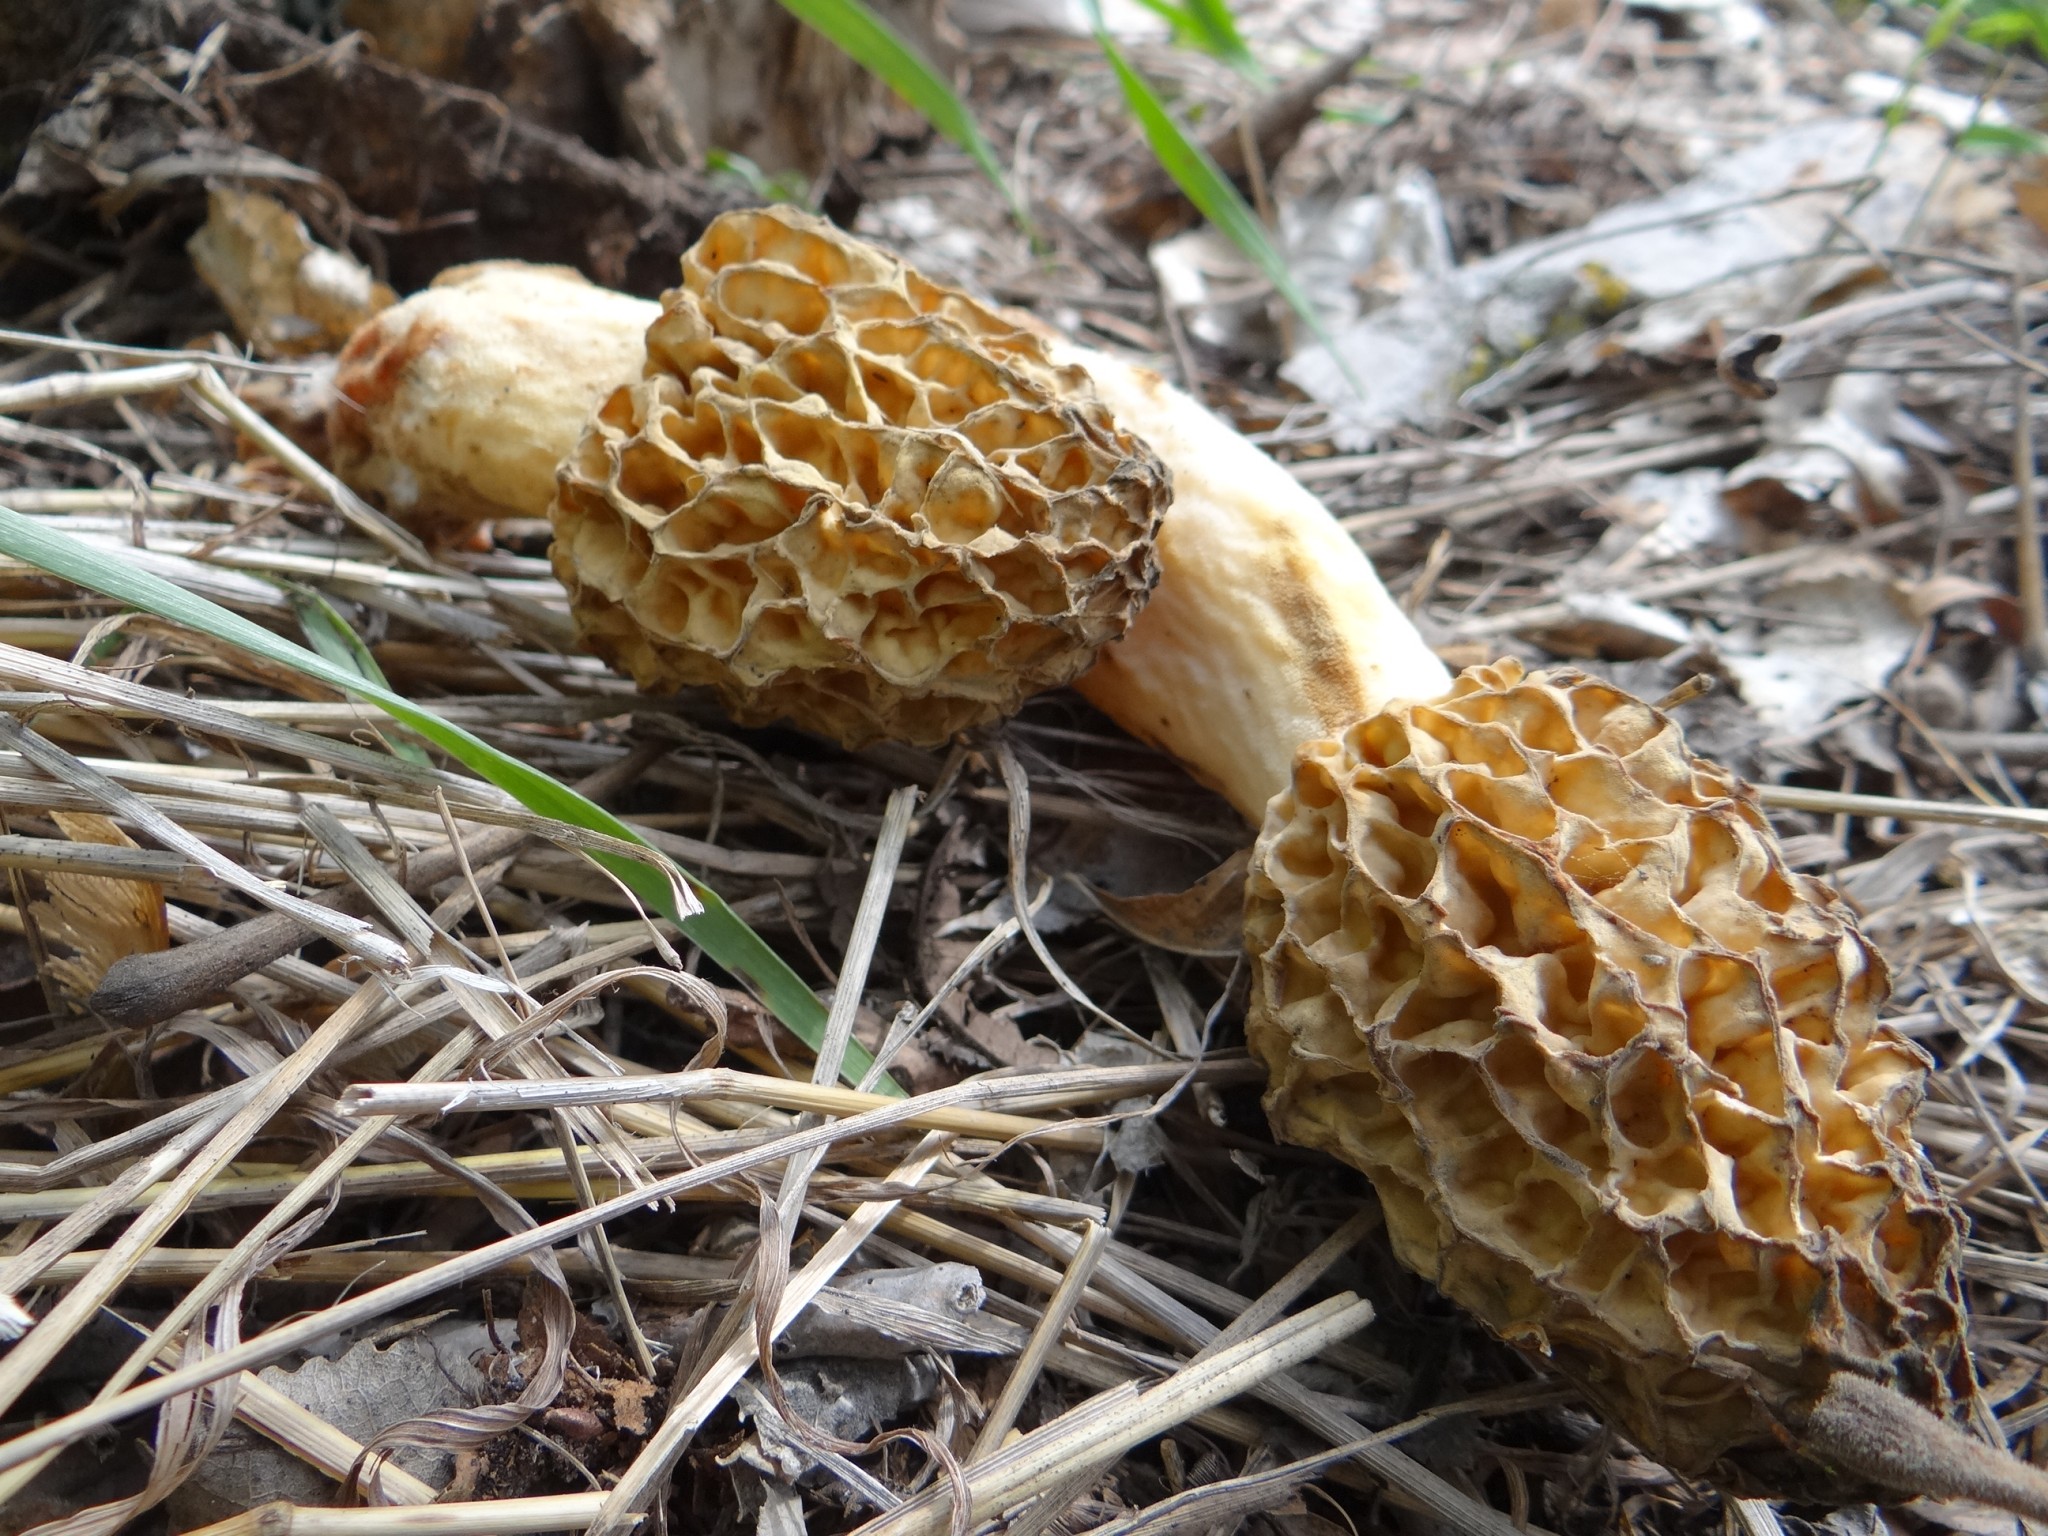 Dried morel mushrooms in Missouri River woodlands. Photo by Greg Wagner.